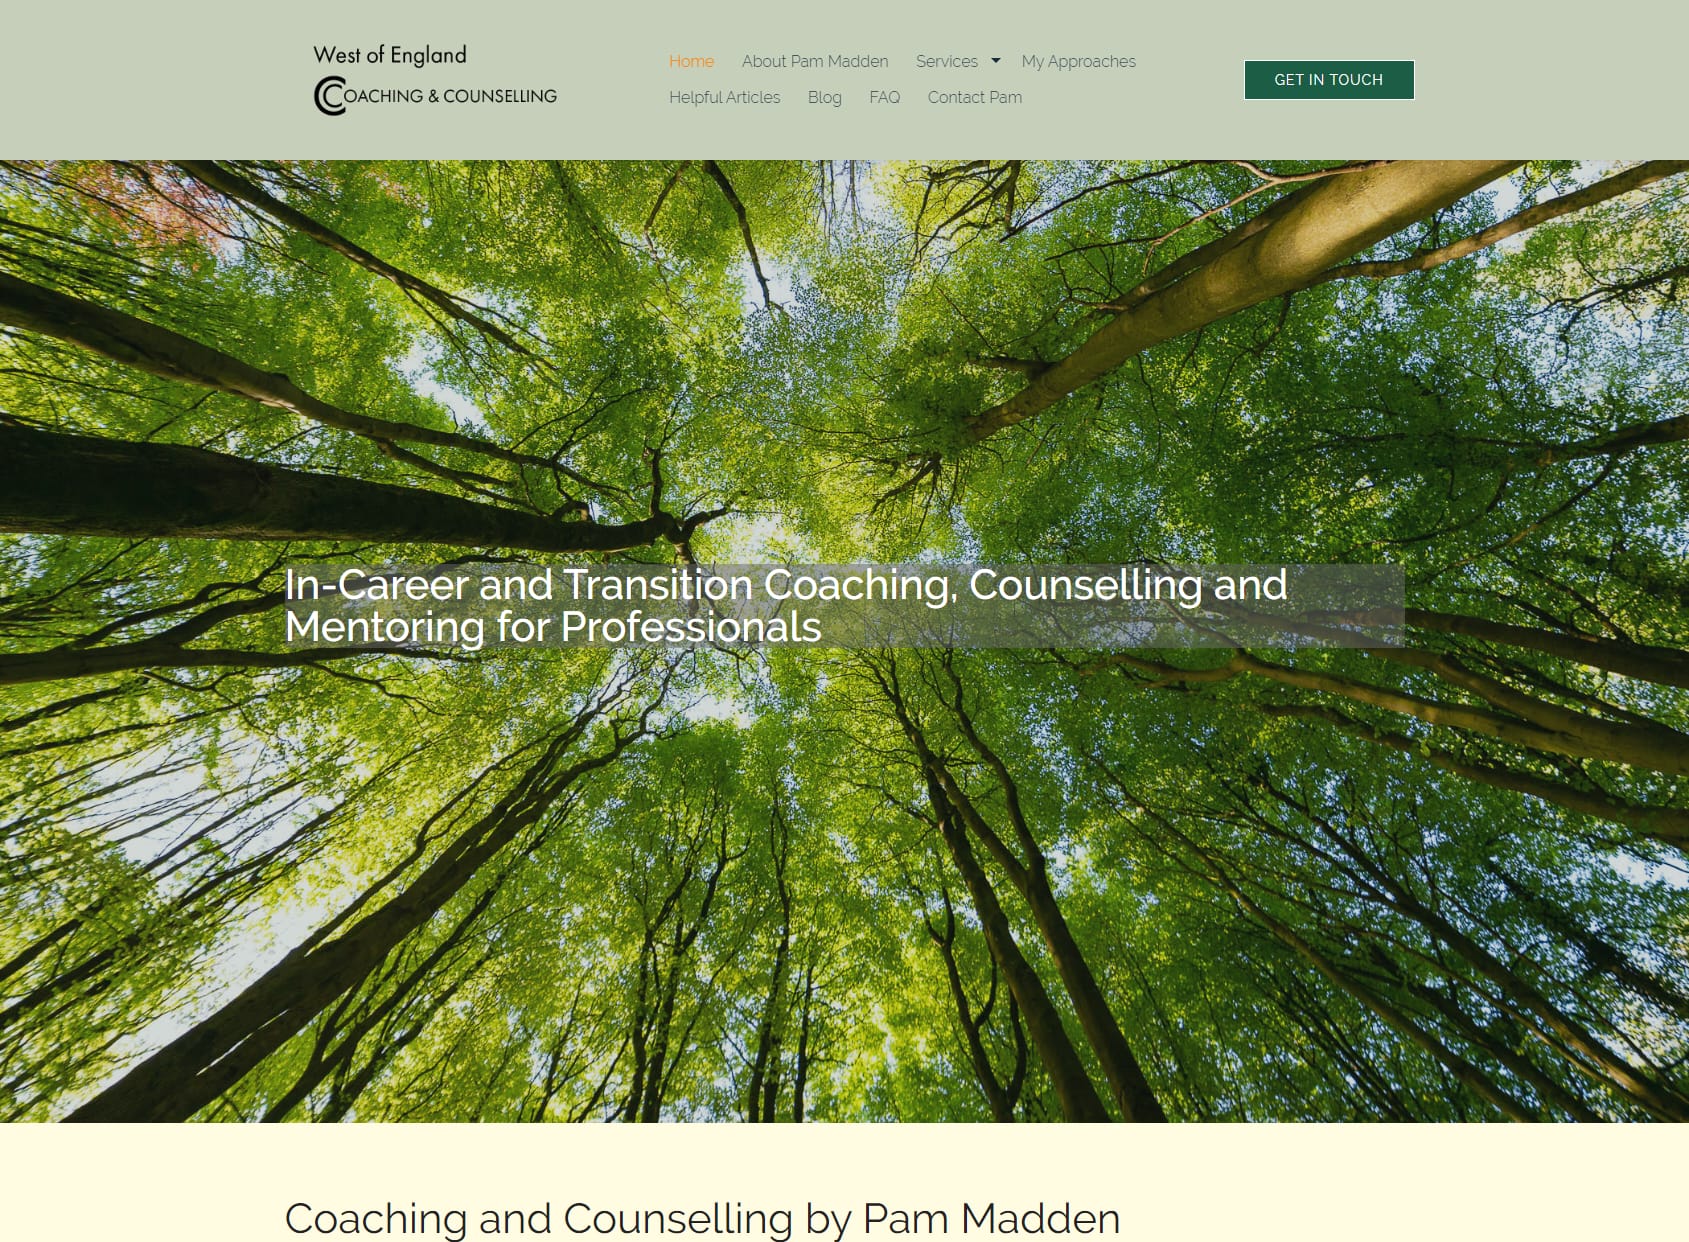 West of England Coaching and Counselling